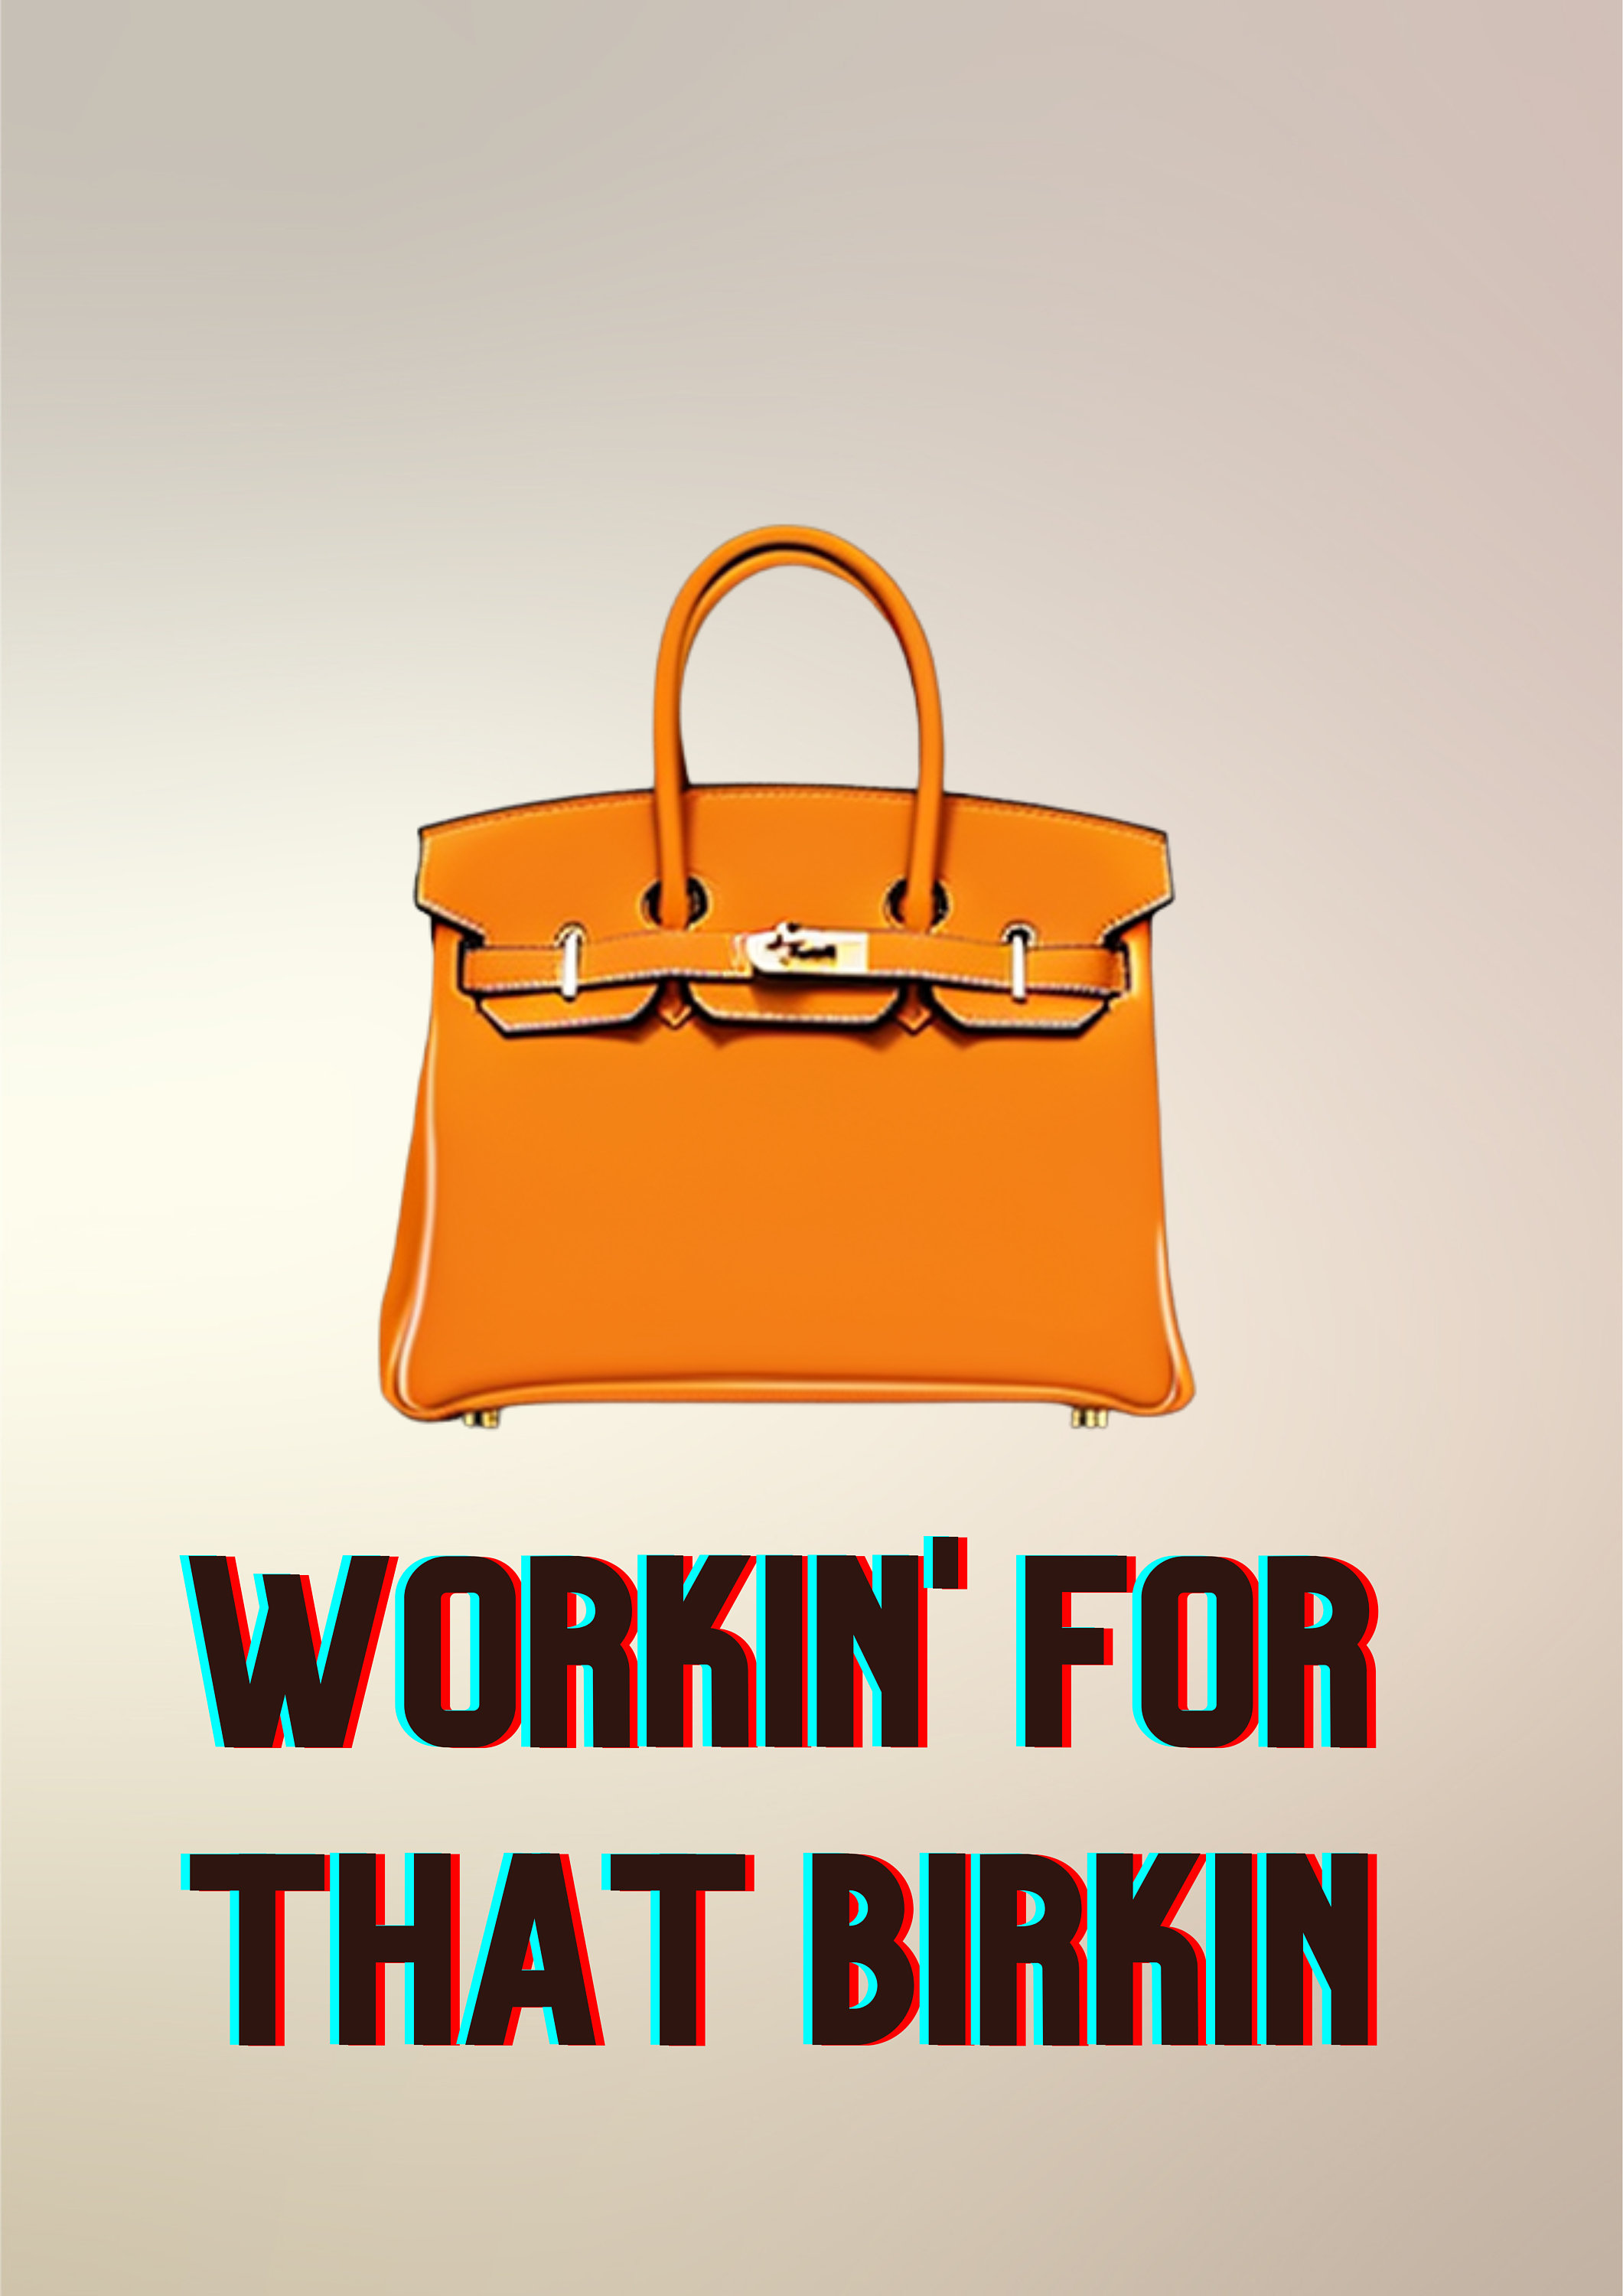 Birkin Canvas Tote - 100 % cotton, tote bag, funny quotes, designer tote  bag, funny gift, valentines gift, gift for her, canvas tote bag